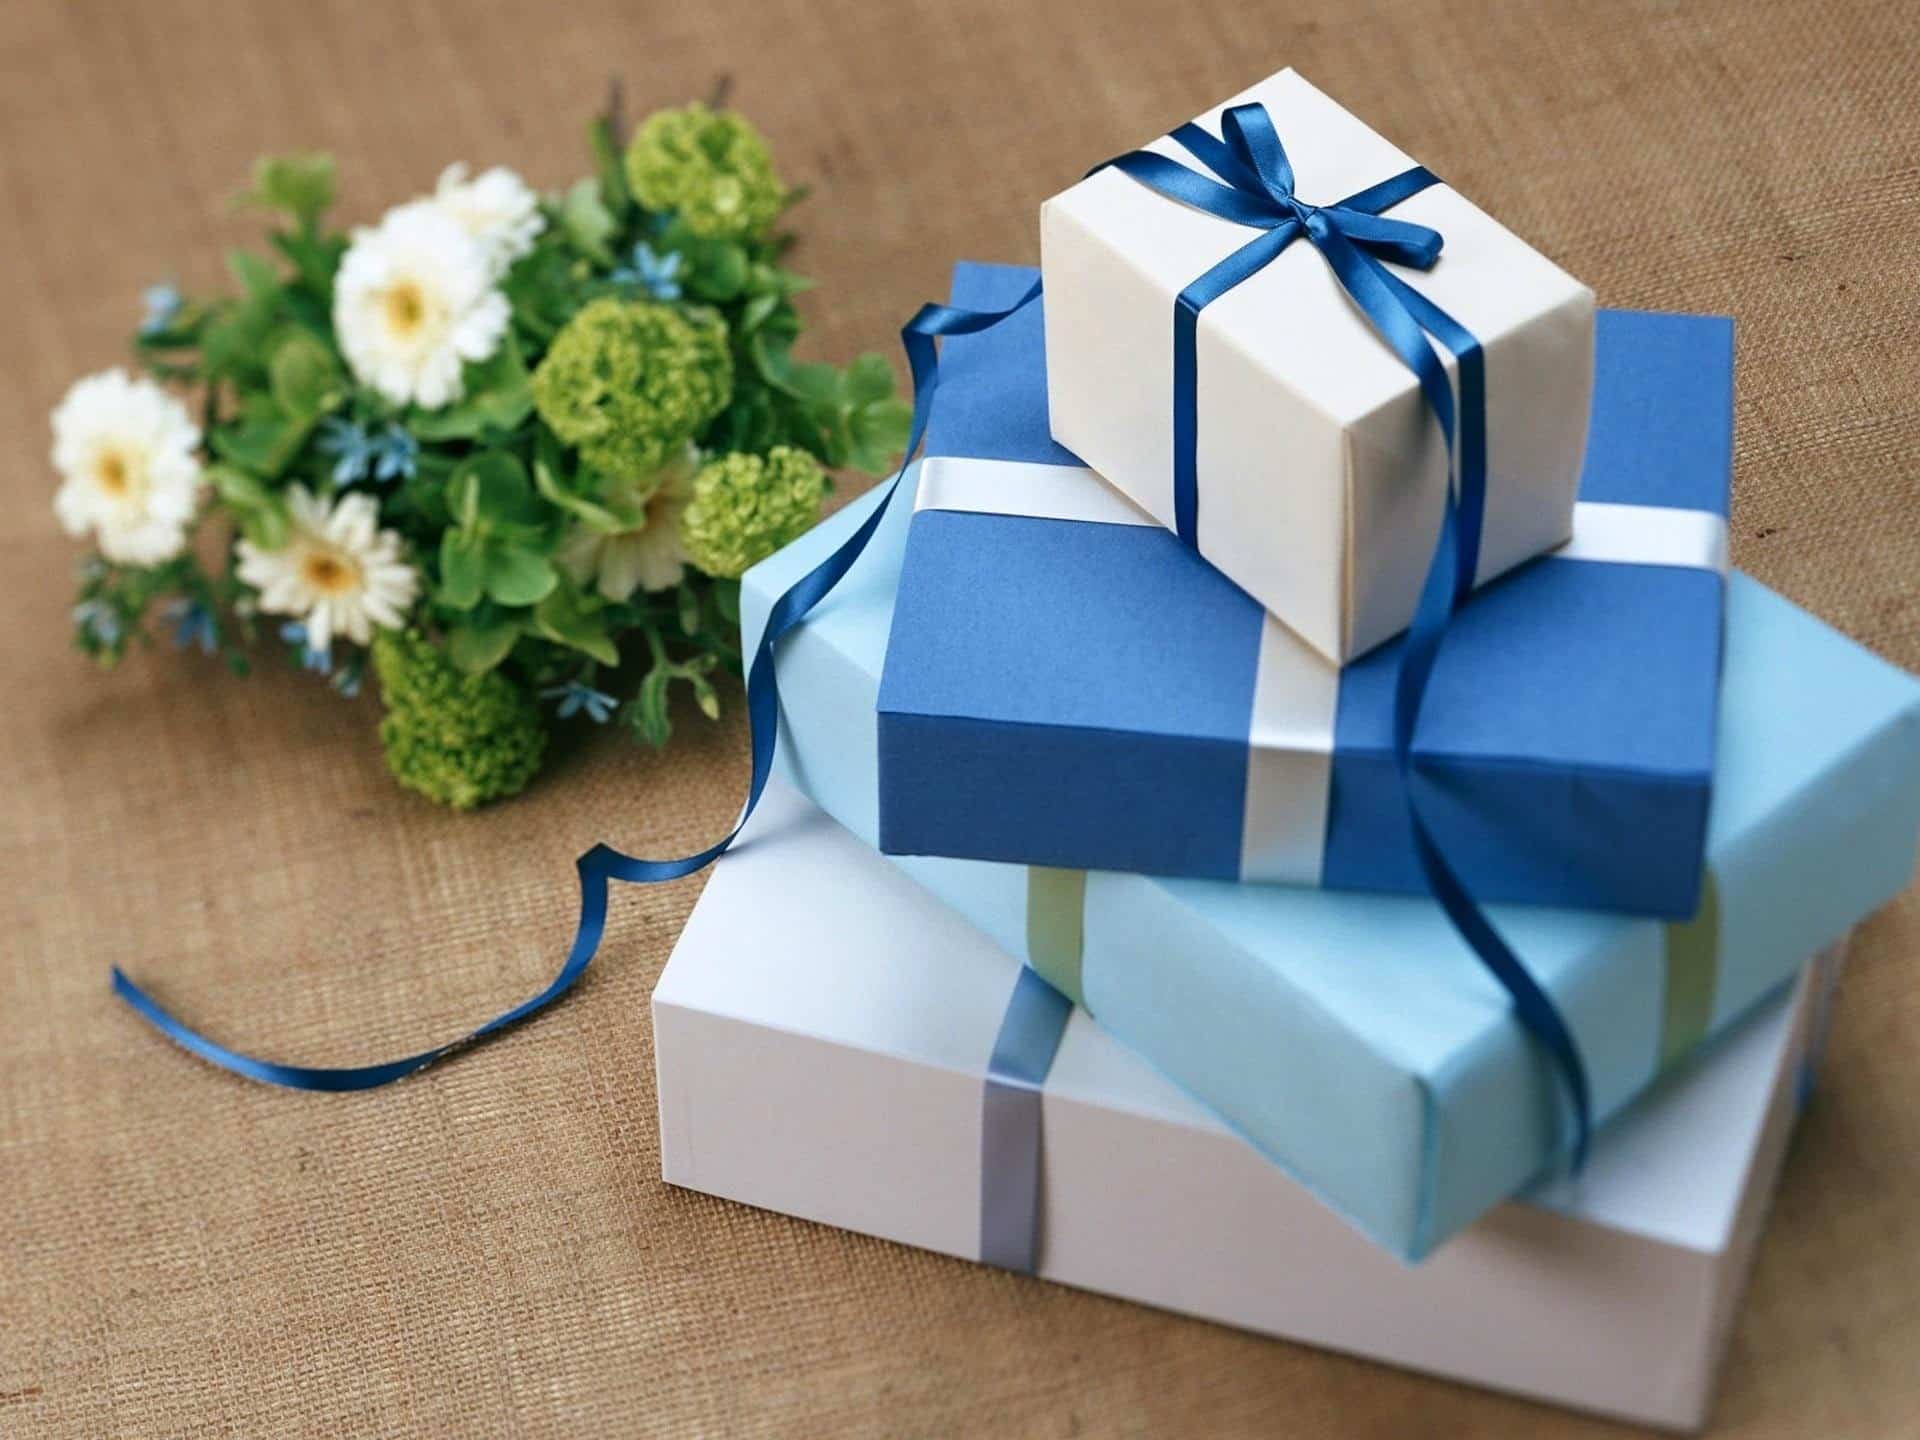 Three presents in a stack next to a bouquet.